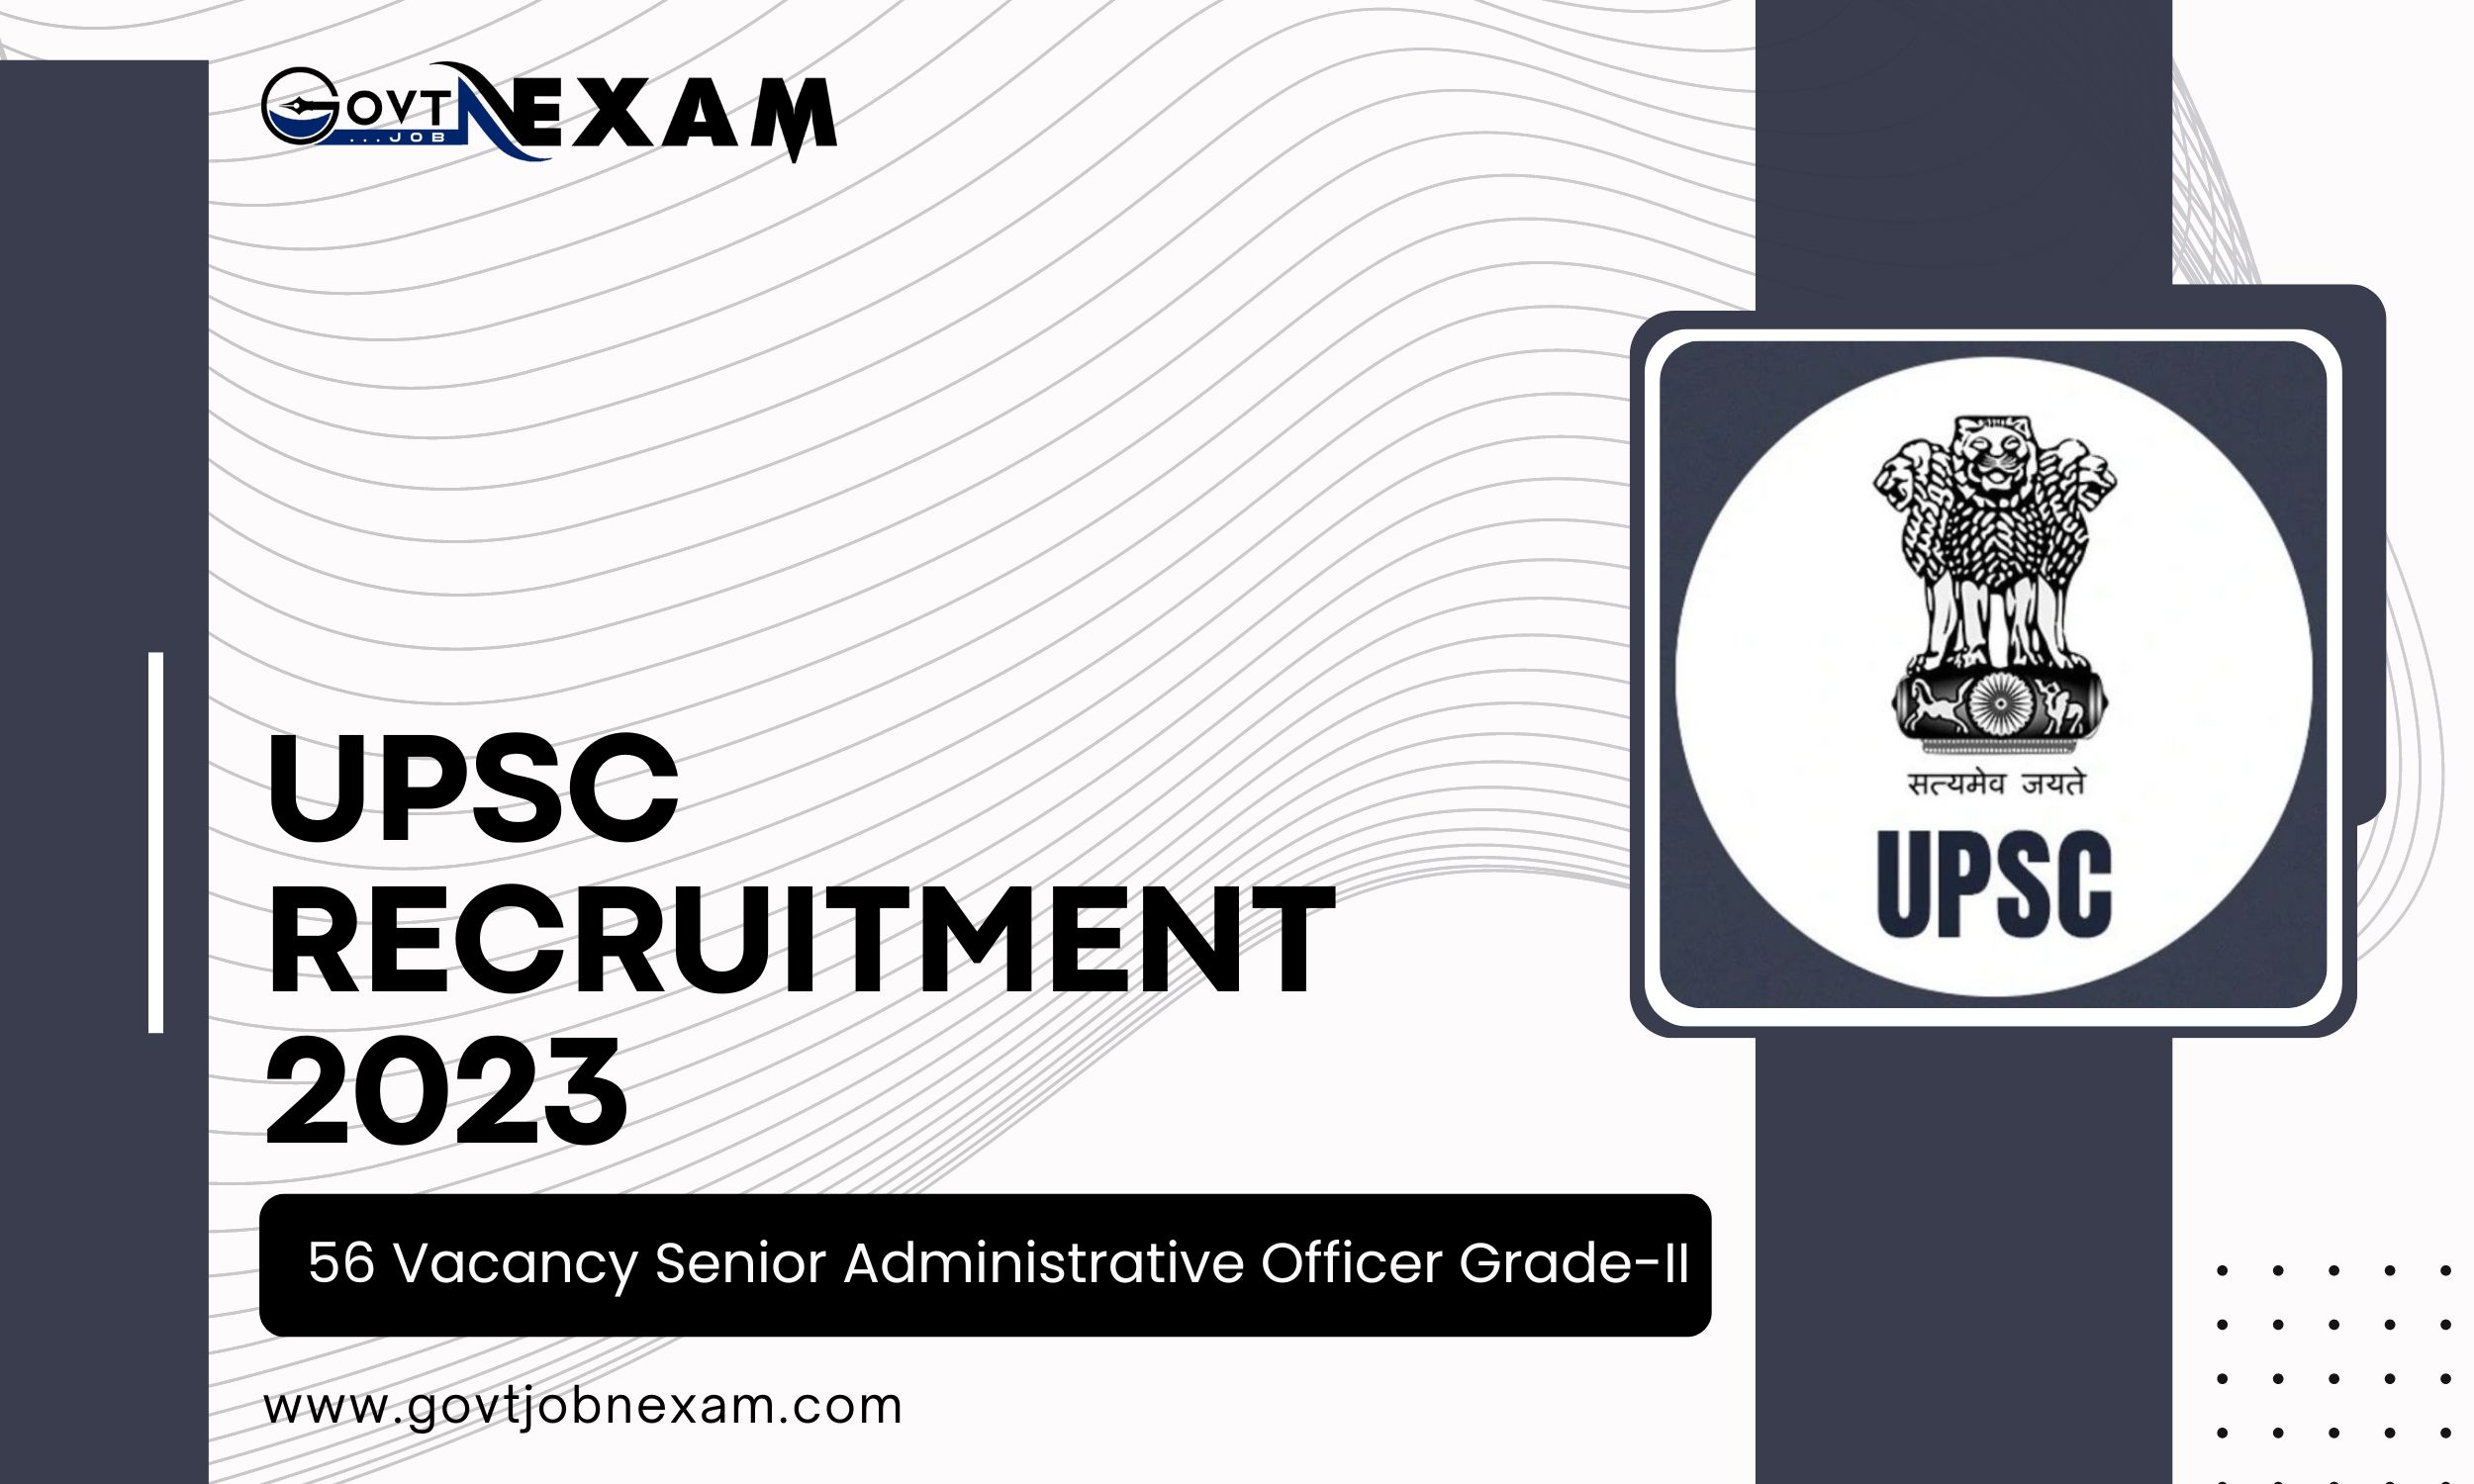 You are currently viewing UPSC Recruitment 2023 – Apply Online For 56 Vacancy Senior Administrative Officer Grade-II